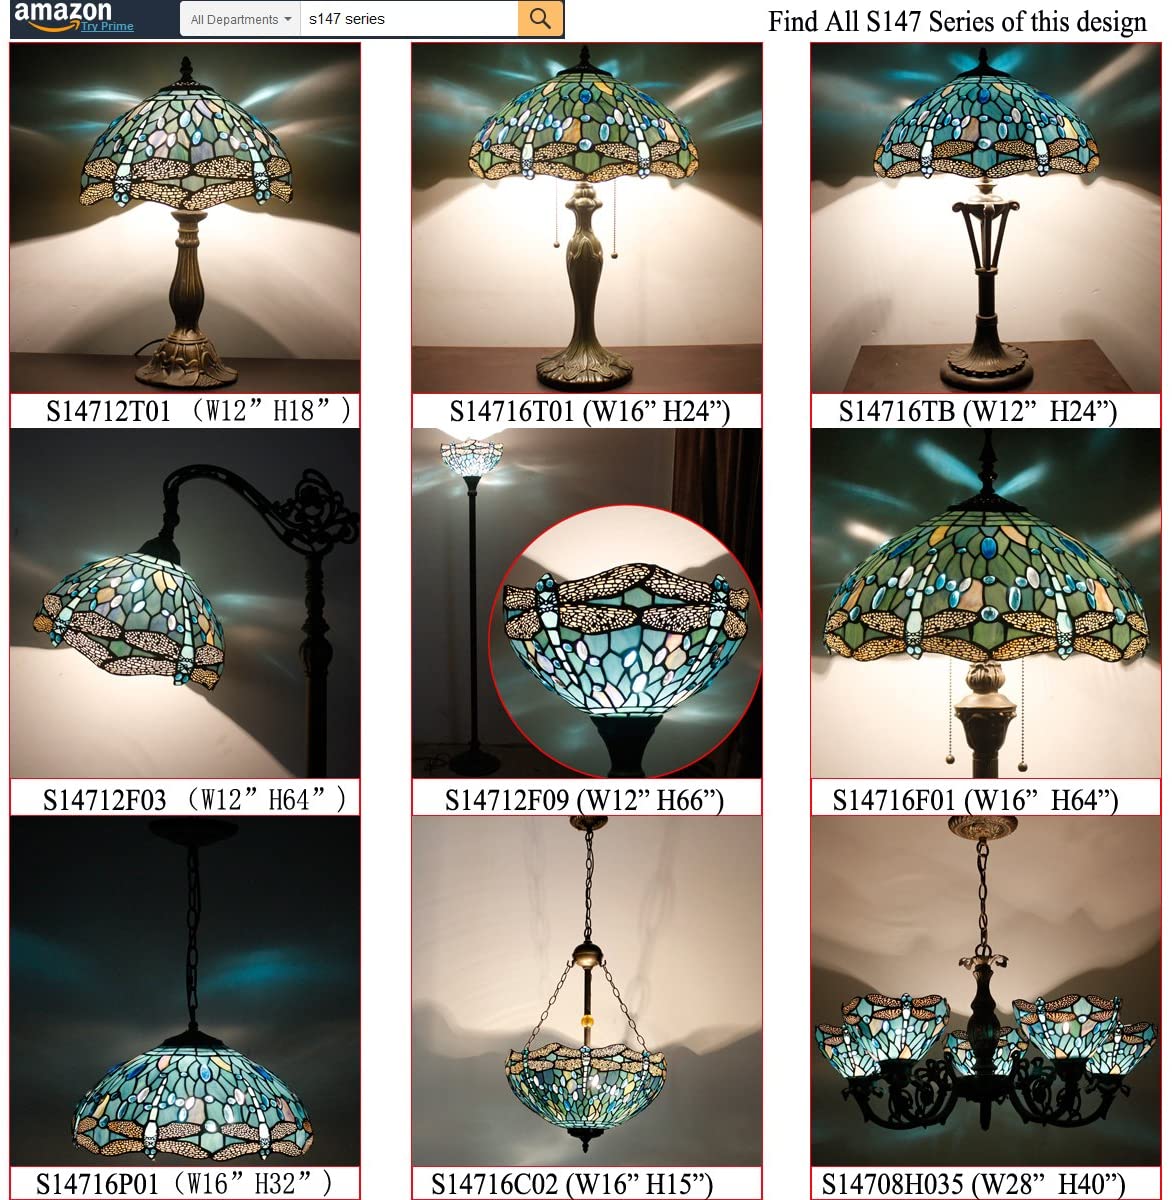 BBNBDMZ  Floor Lamp Sea Blue Stained Glass Dragonfly Standing Reading Light 16X16X64 Inches Antique Pole Corner Lamp Decor Bedroom Living Room  Office S147 Series